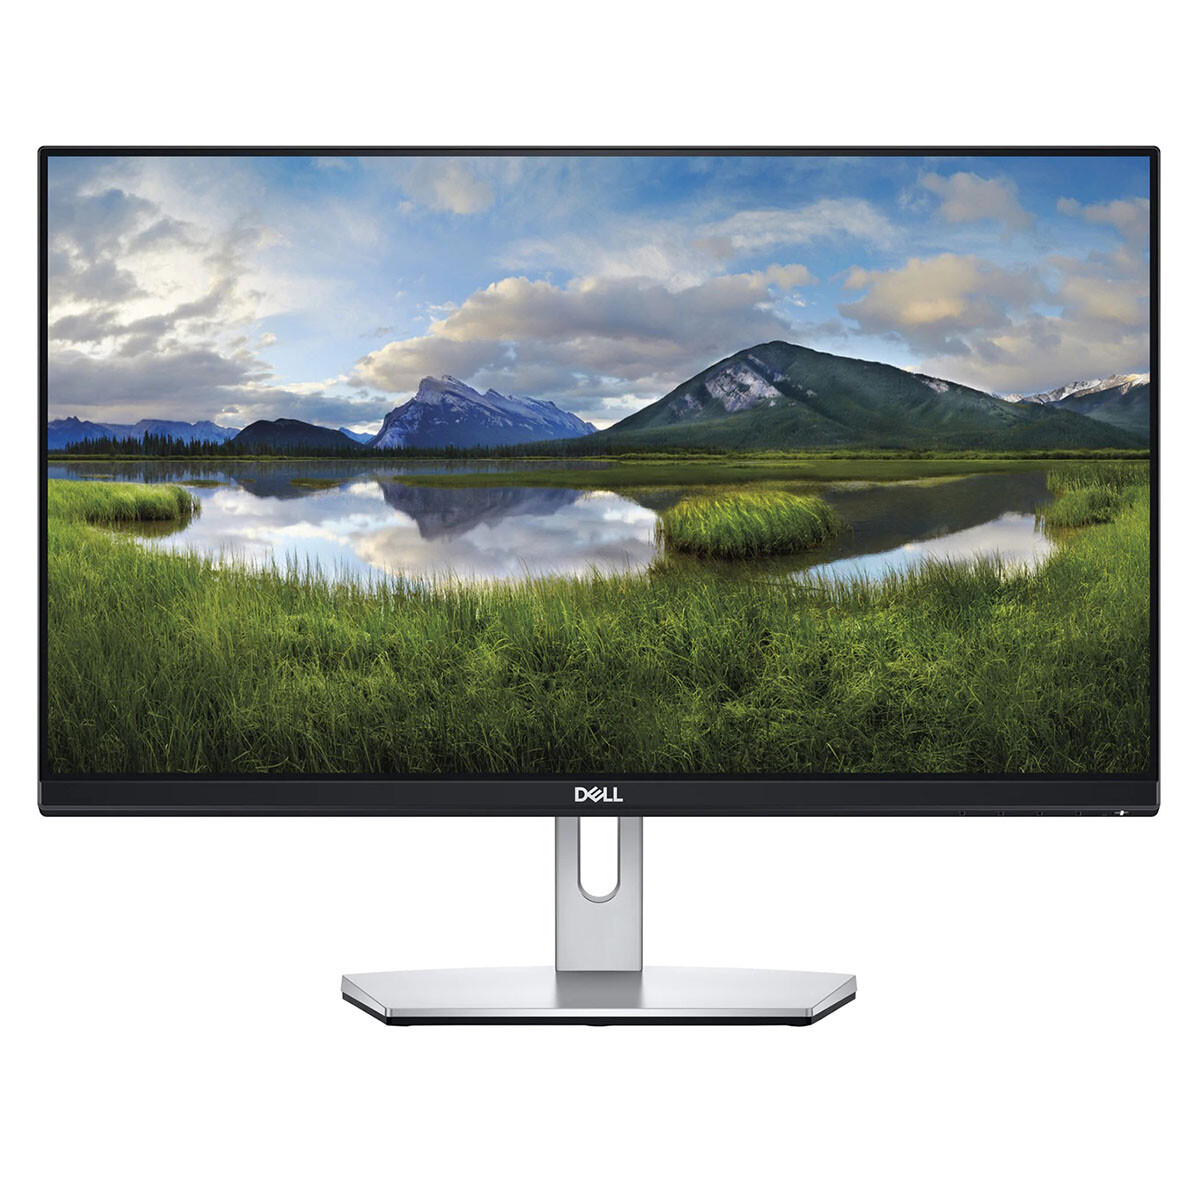 Dell S2419h 24 Inch 1080p Ips Monitor 132 Operating Hours 159 90